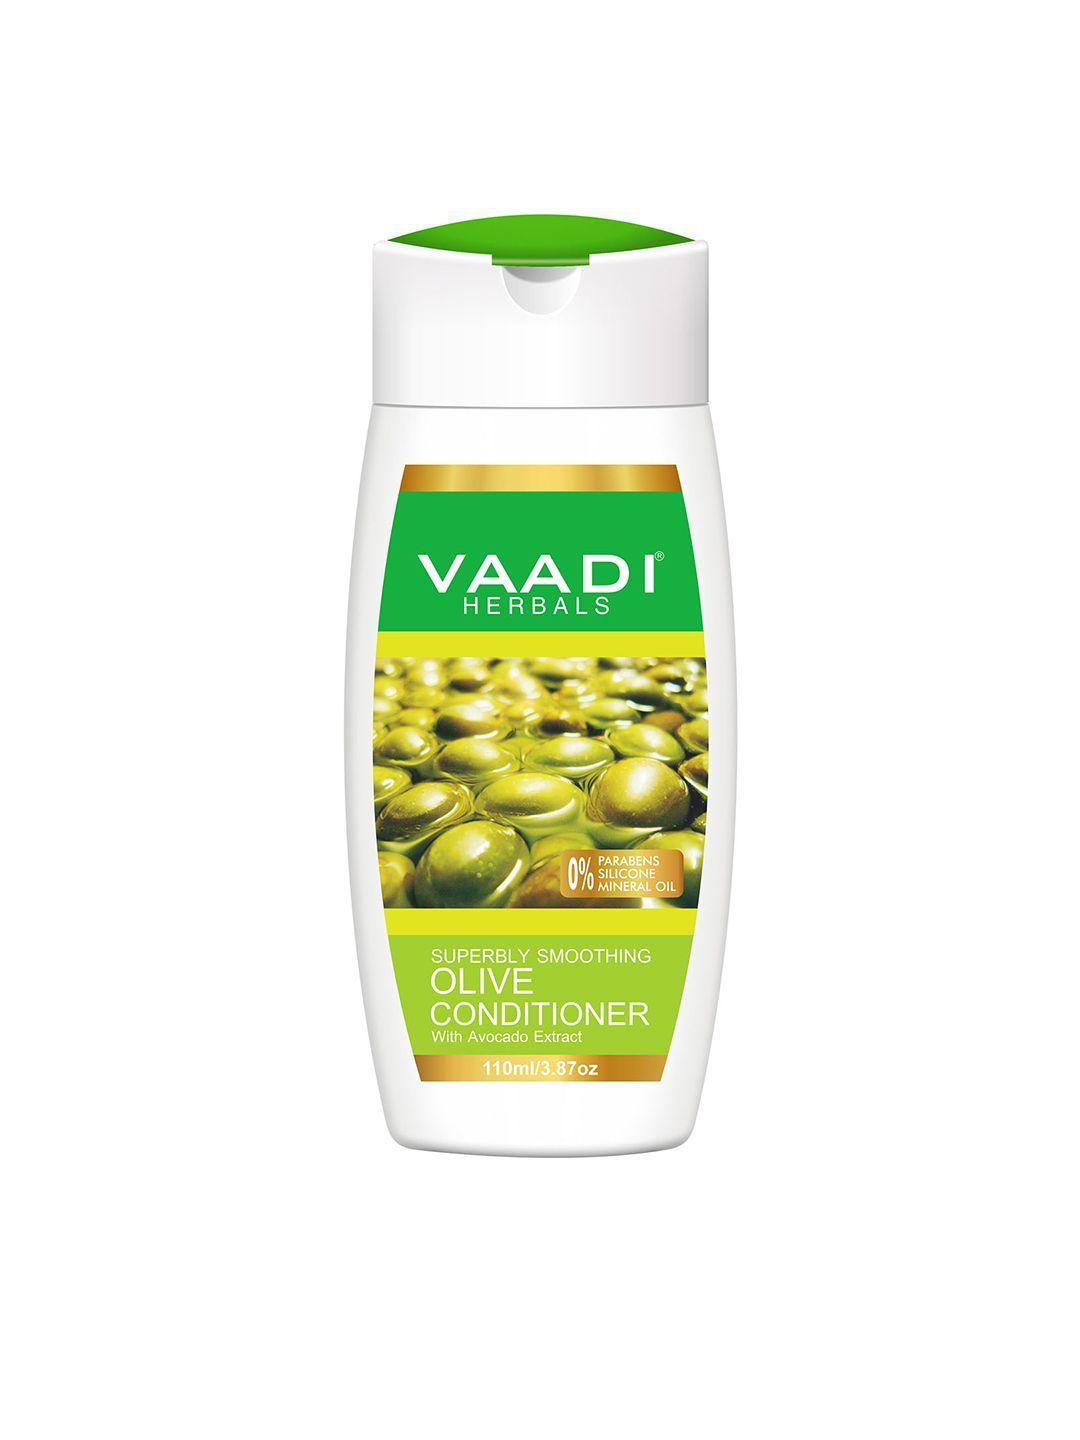 vaadi herbals superbly smoothing olive conditioner with avocado extract - 110ml